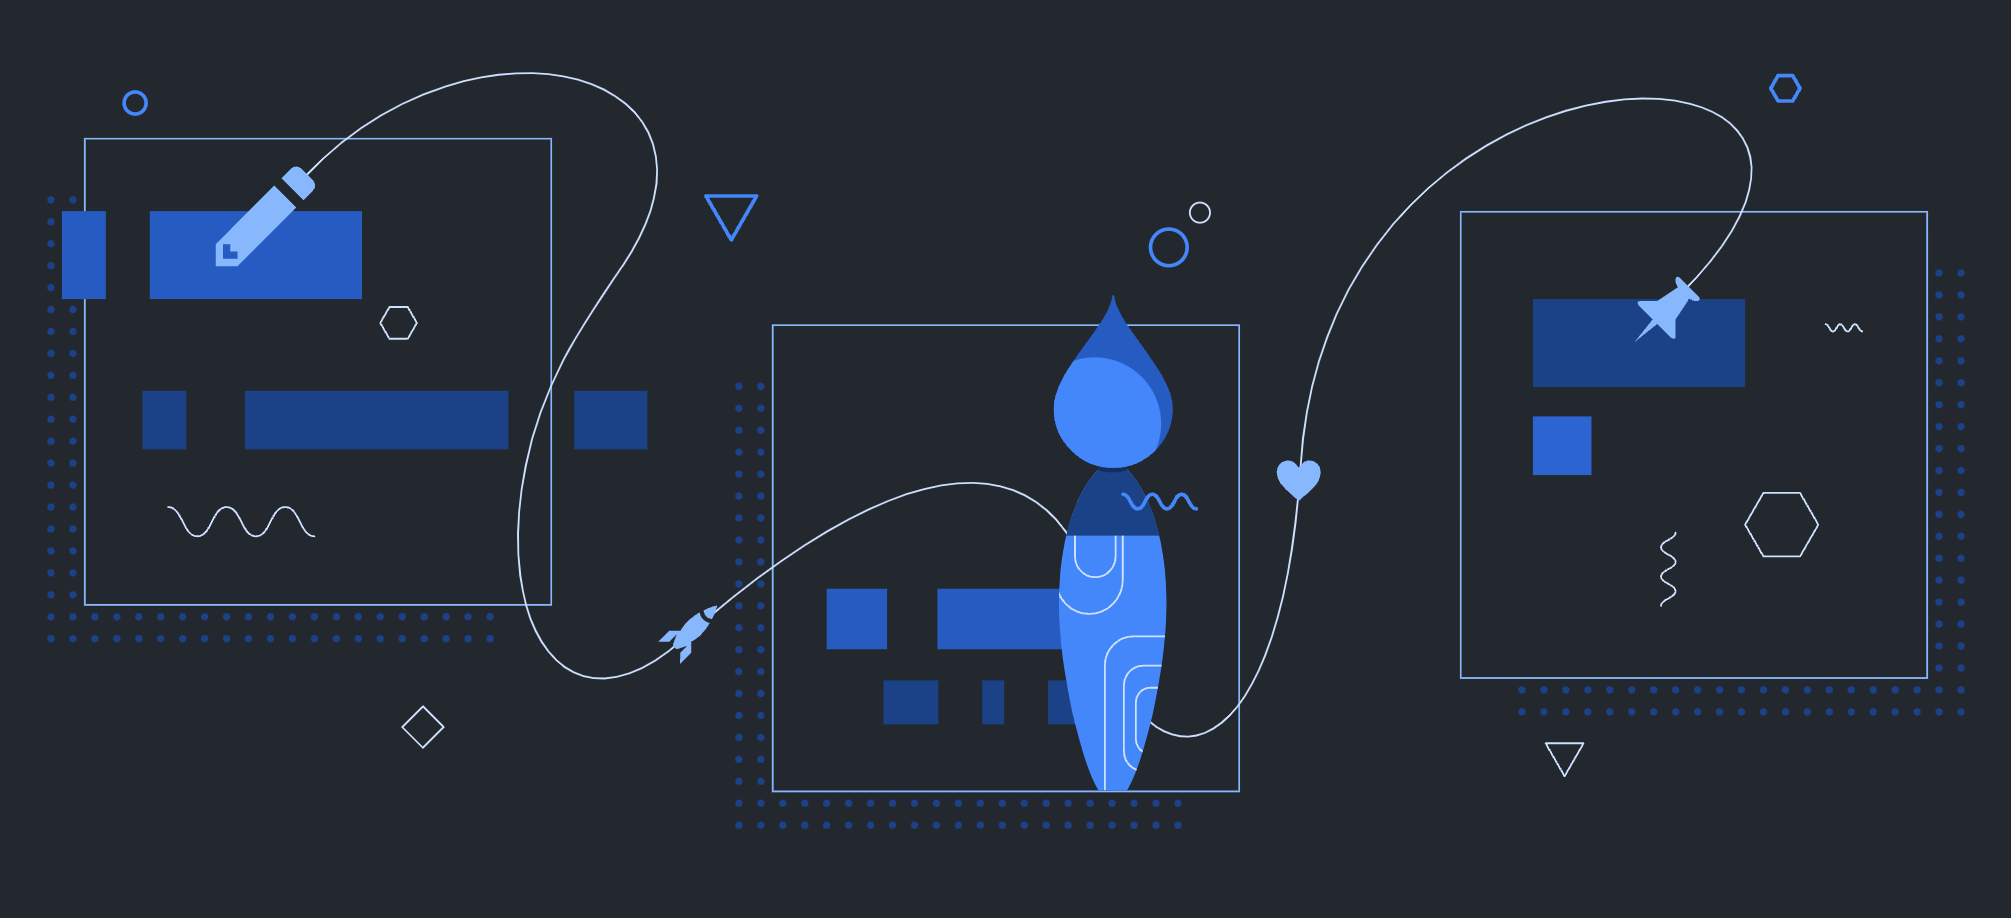 Illustrations of Primer Design System patterns like typography, color, and layout.